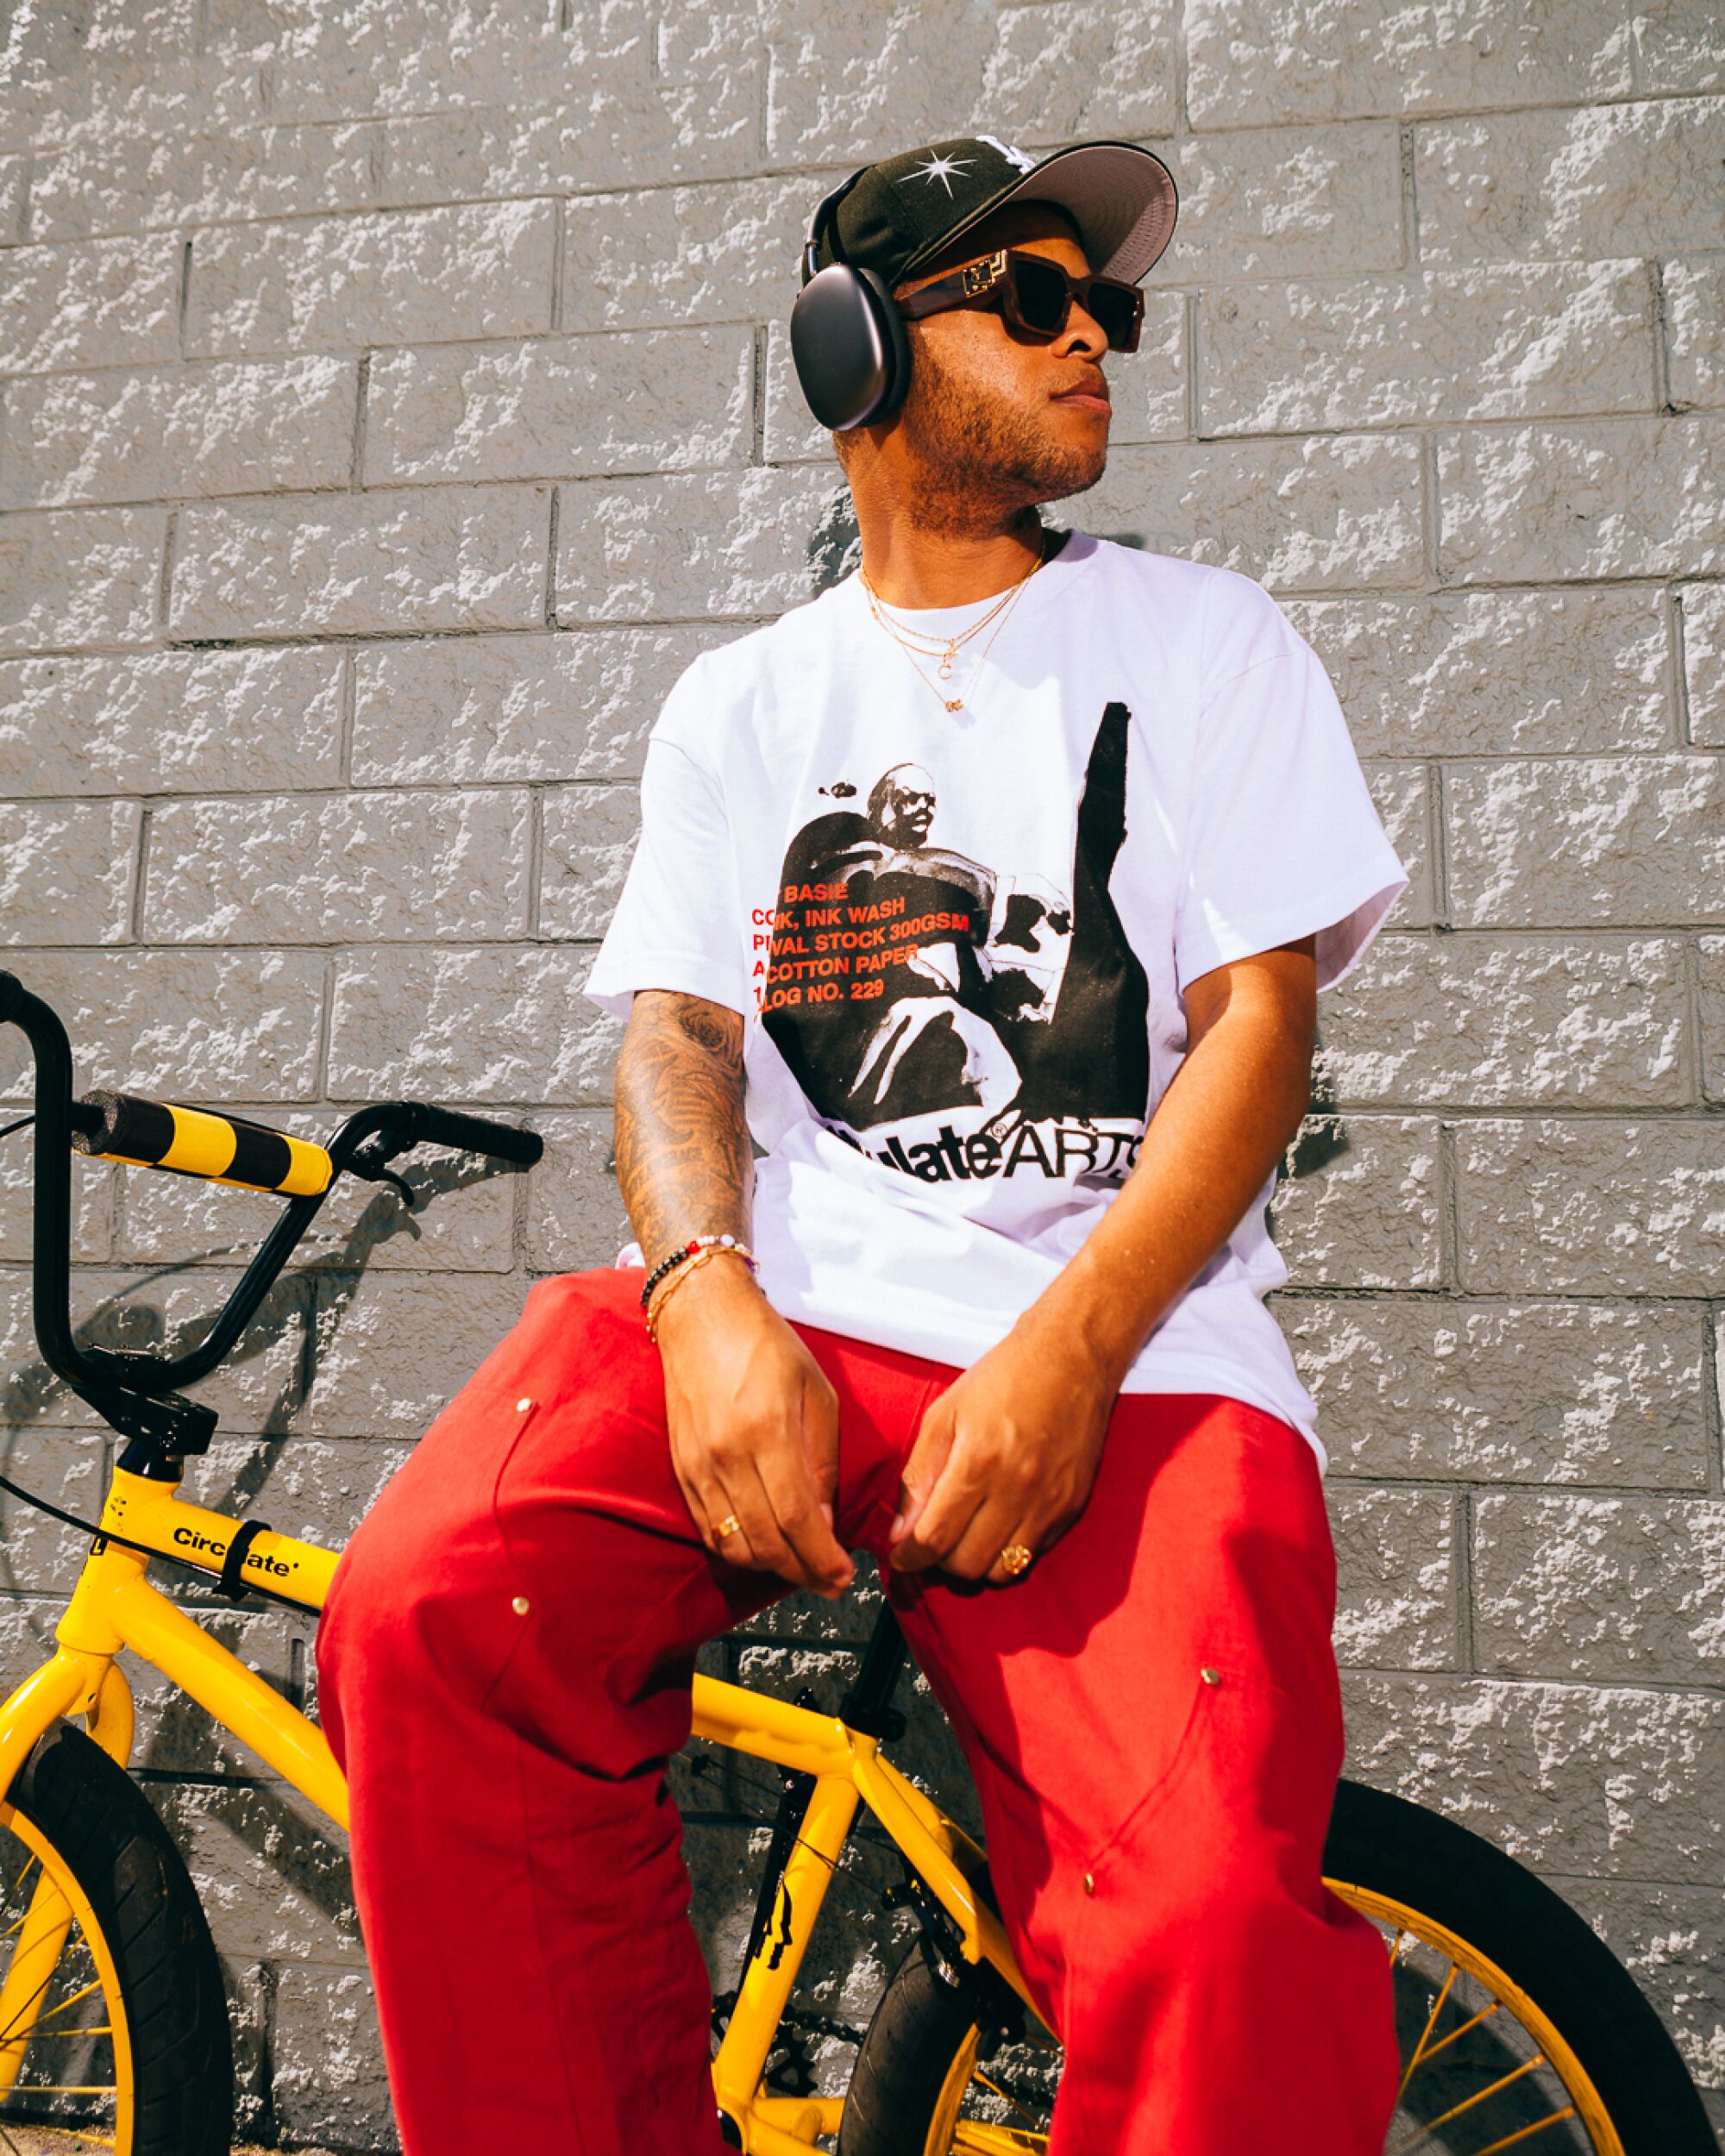 A person in a baseball cap, over-ear headphones, a T-shirt and orange pants leans on a bike against a wall.